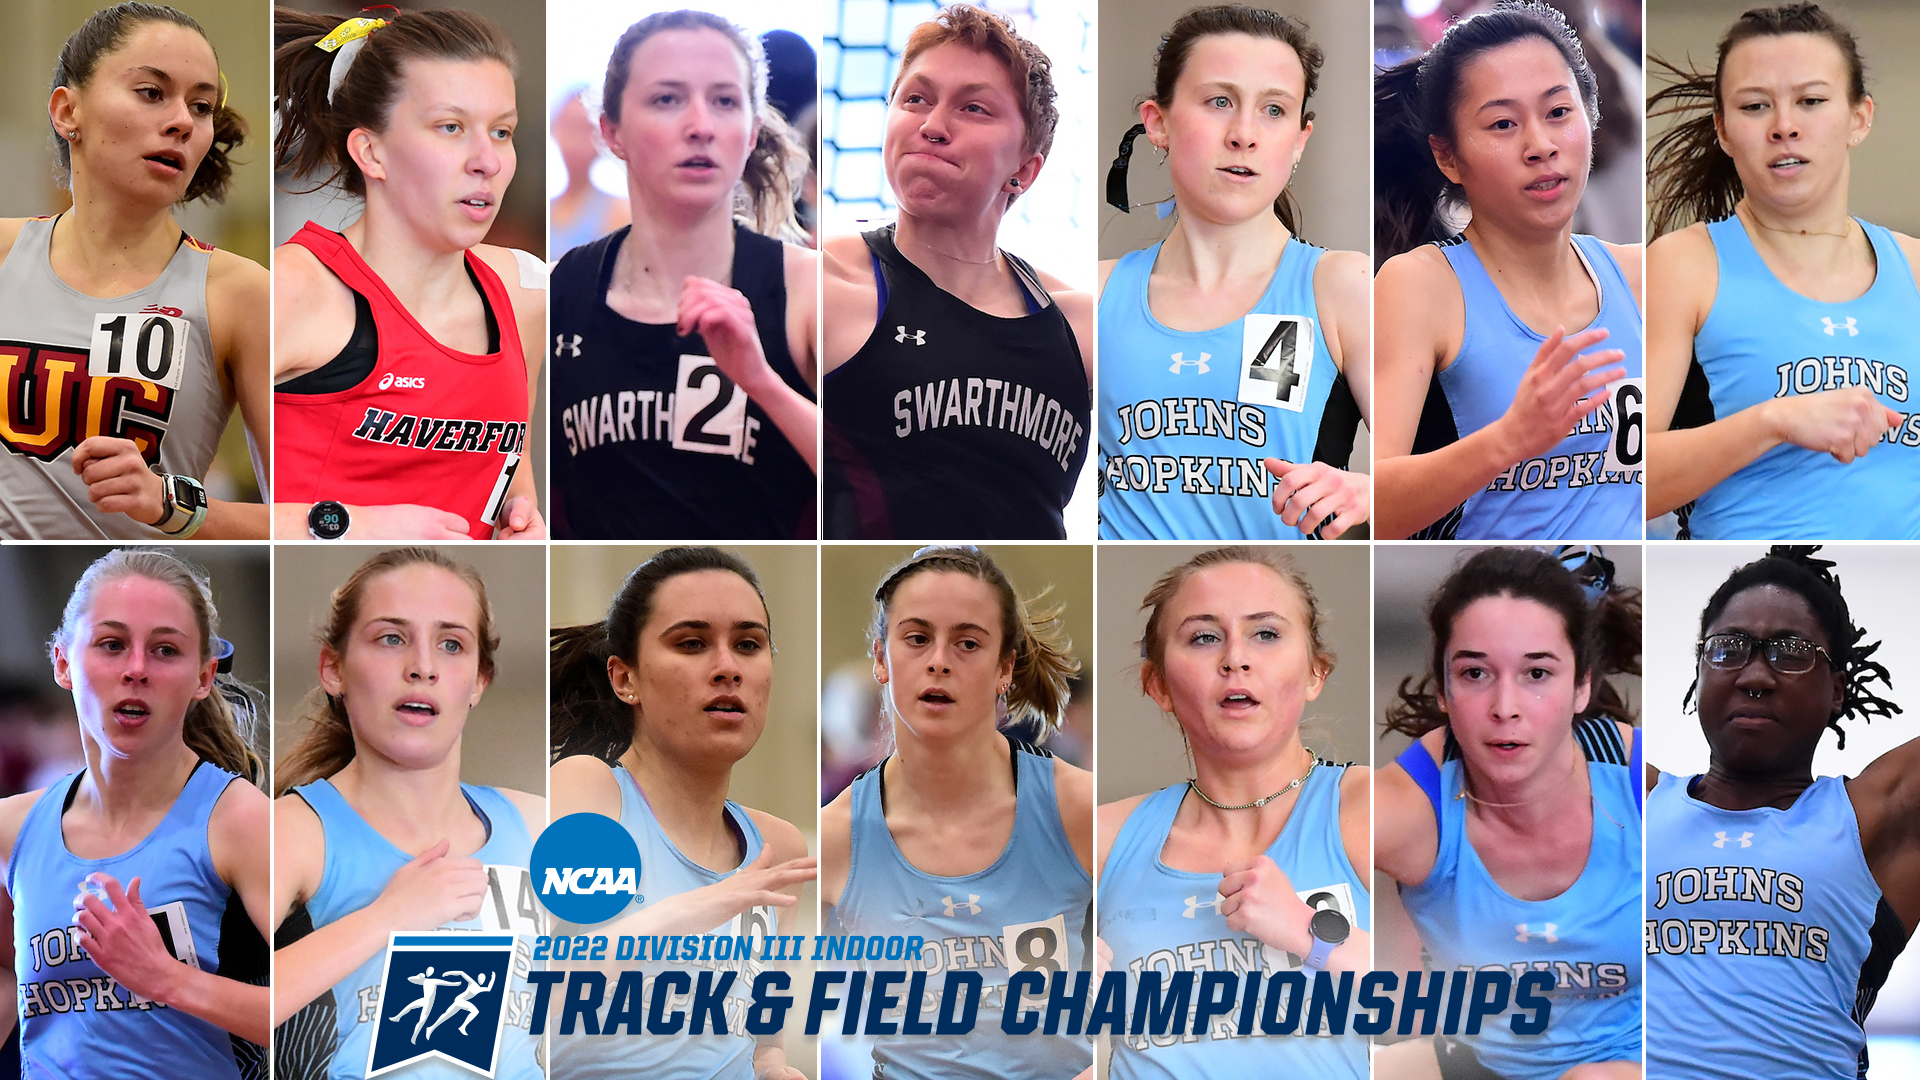 12 Individuals, One Relay Ready for NCAA Women's Indoor Track & Field Championship